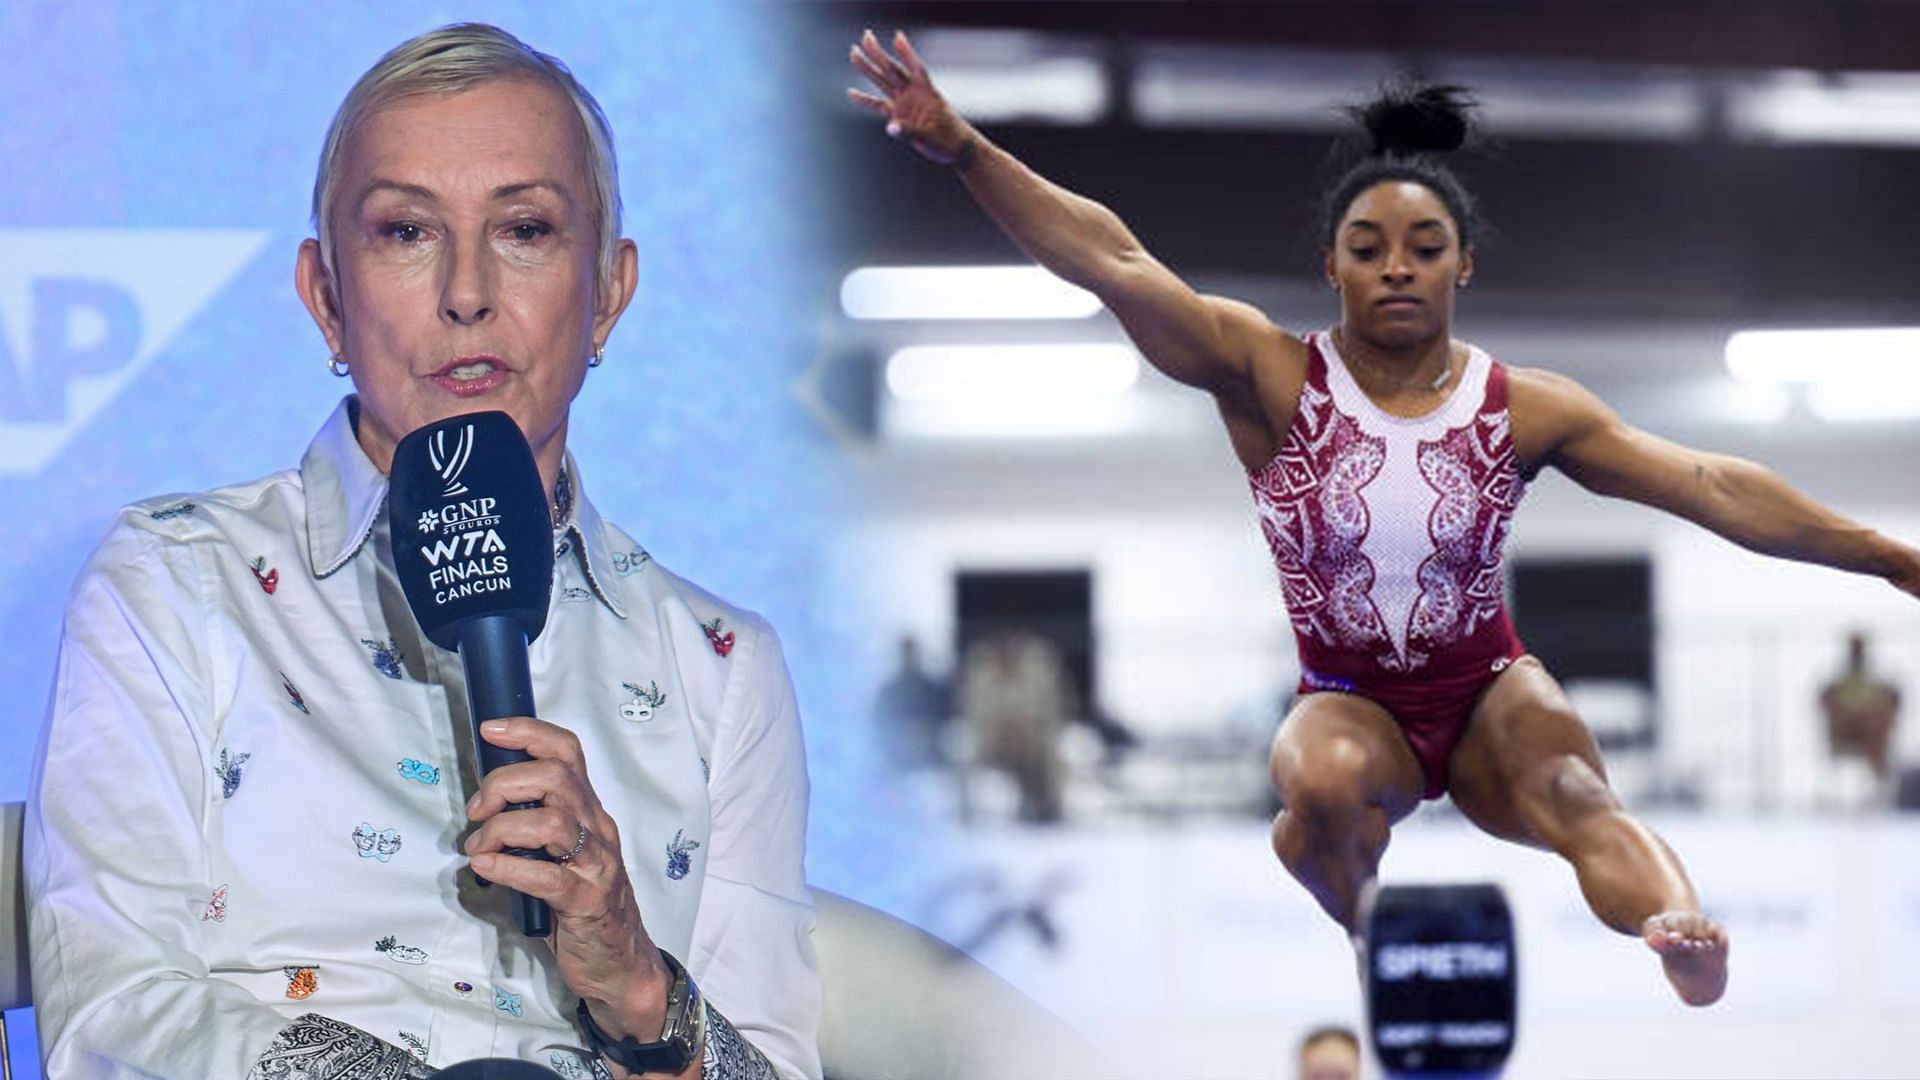 Martina Navratilova lashed out at GOP candidate Mark Robinson over his 2021 comments about Simone Biles